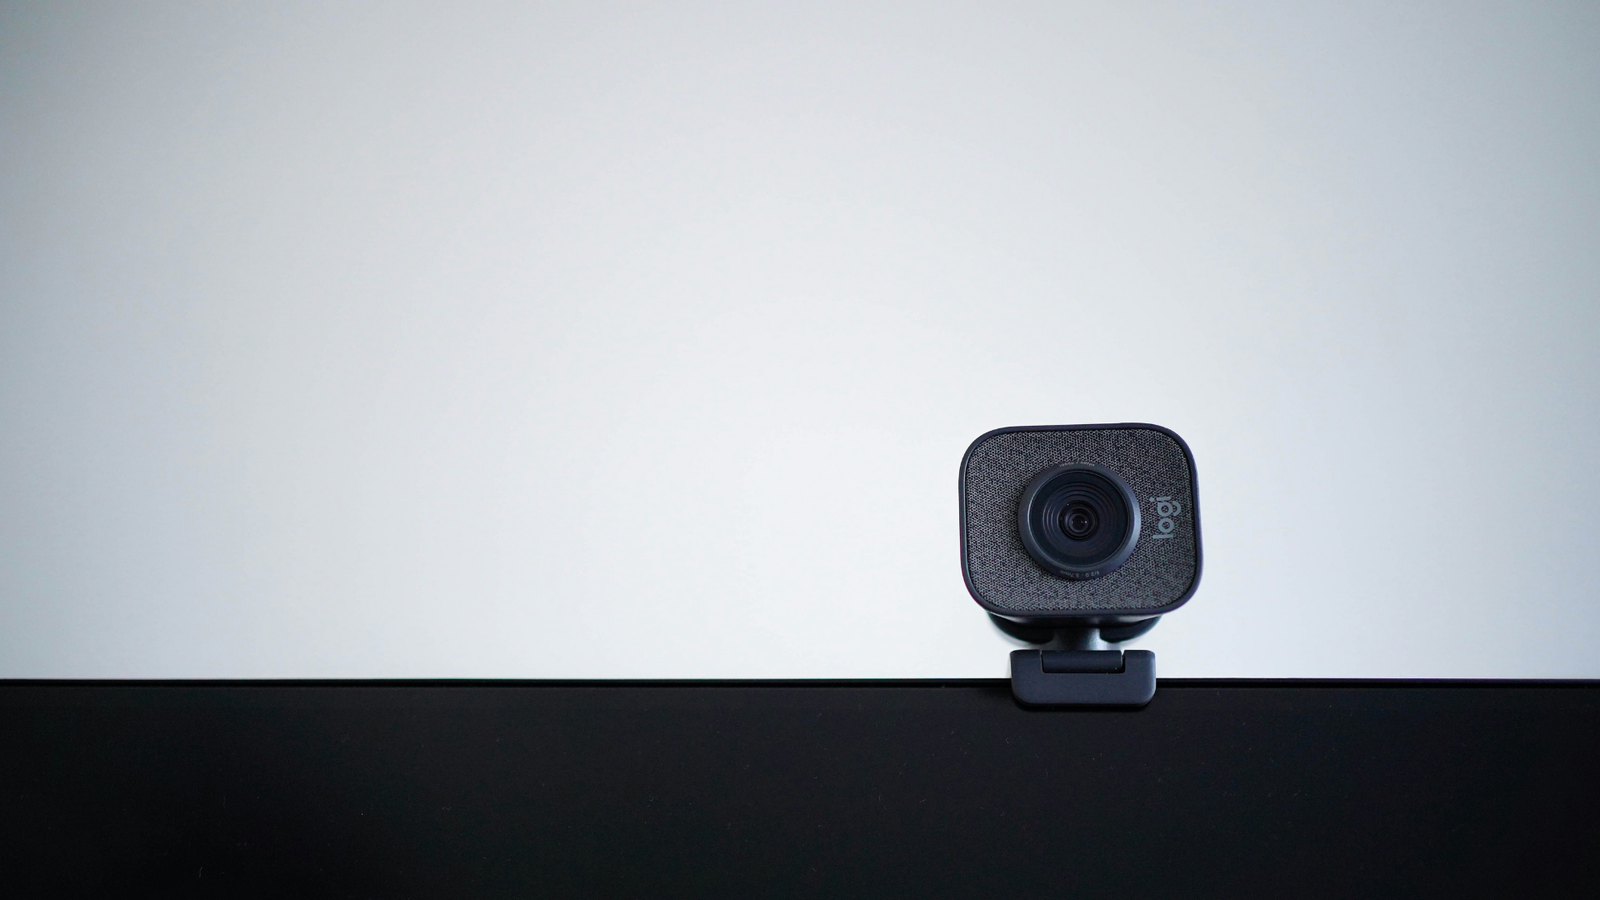 How to adjust camera settings to get the most out of your webcam?